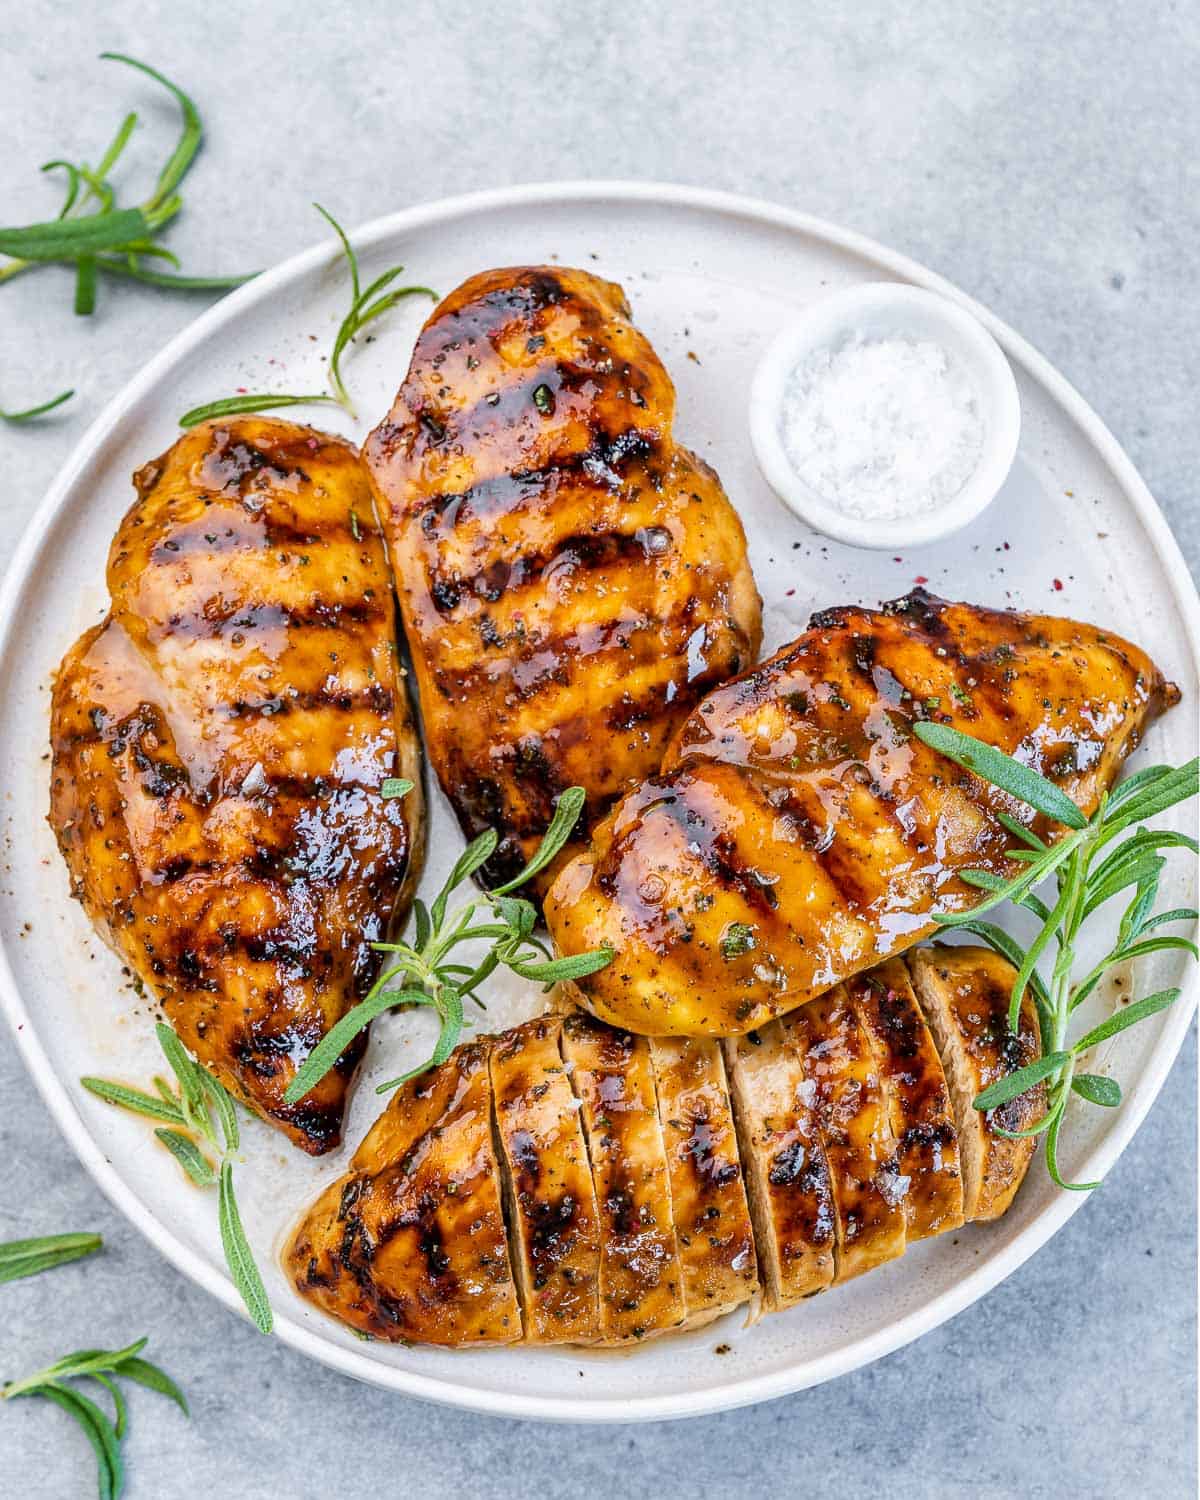 Top view of 4 grilled chicken breasts over a white plate.